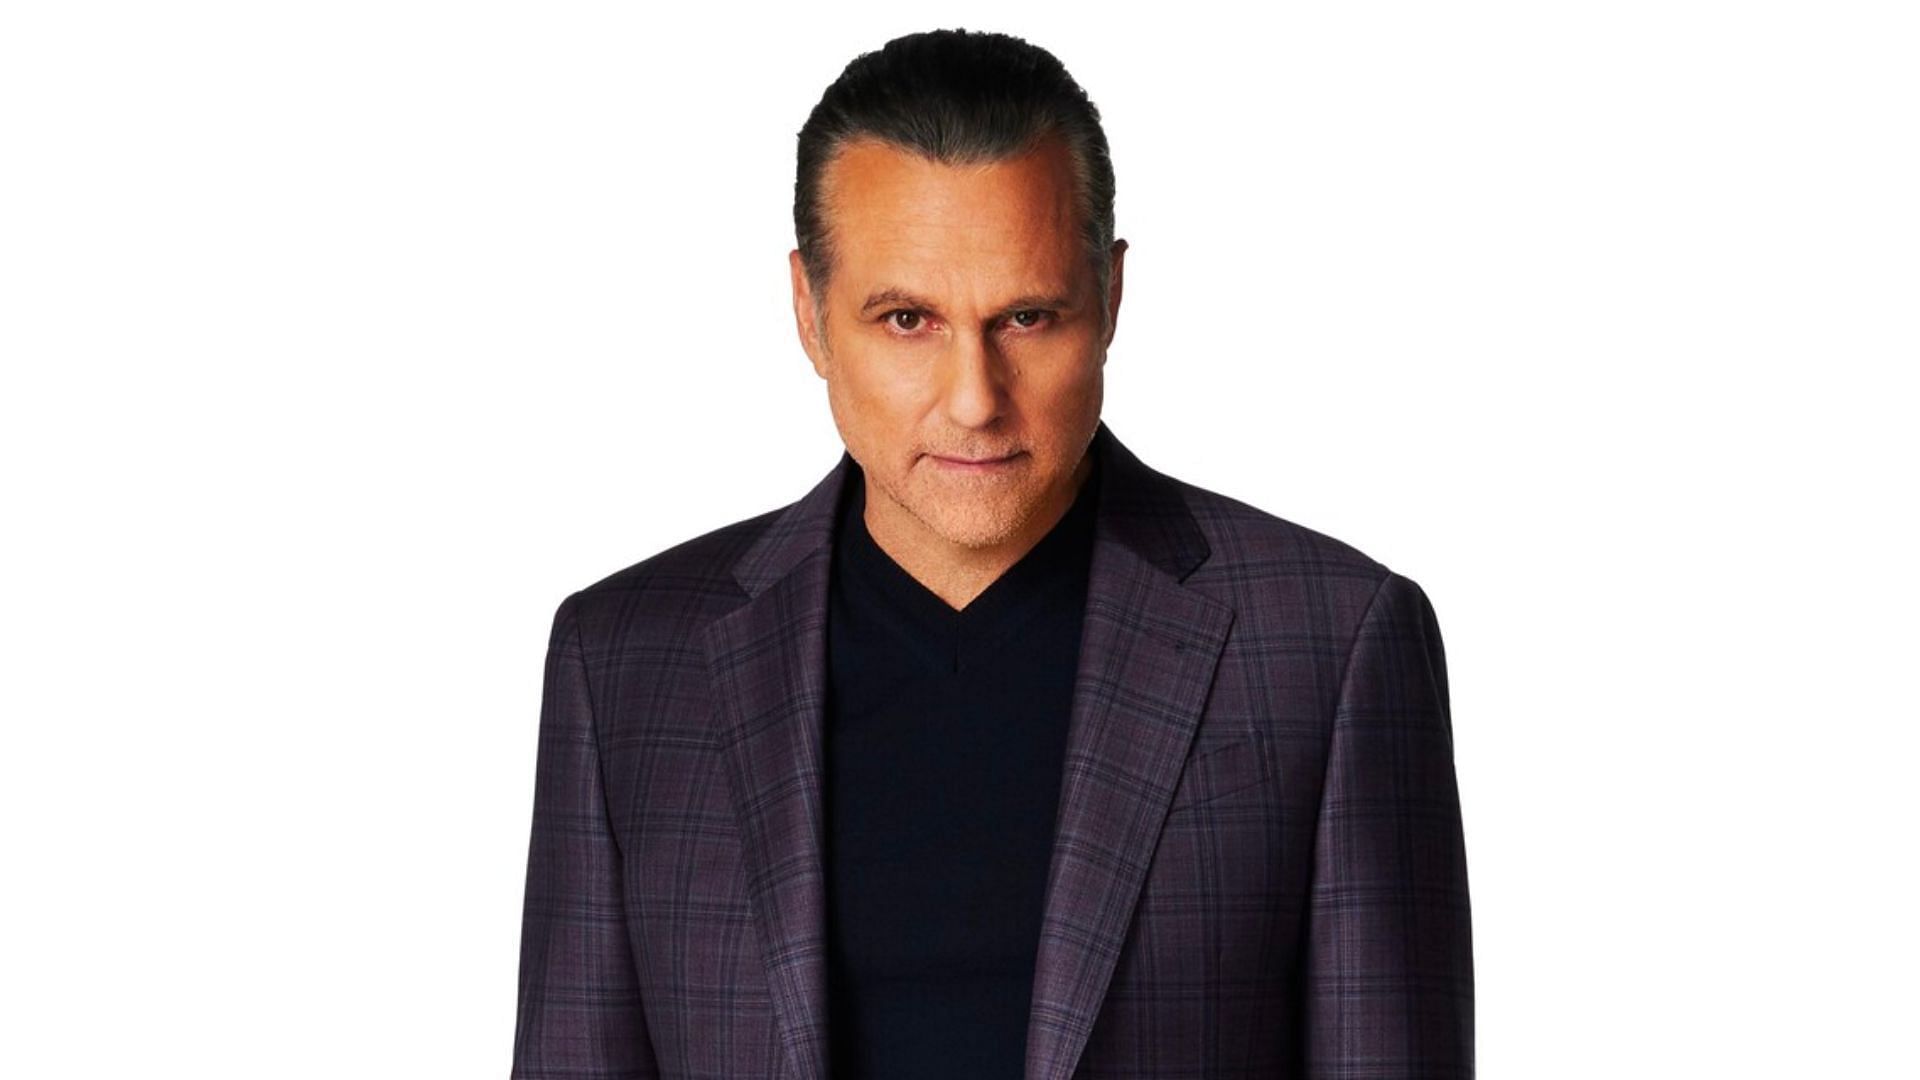 Sonny Corinthos is played by Maurice Benard in General Hospital (Image via ABC)